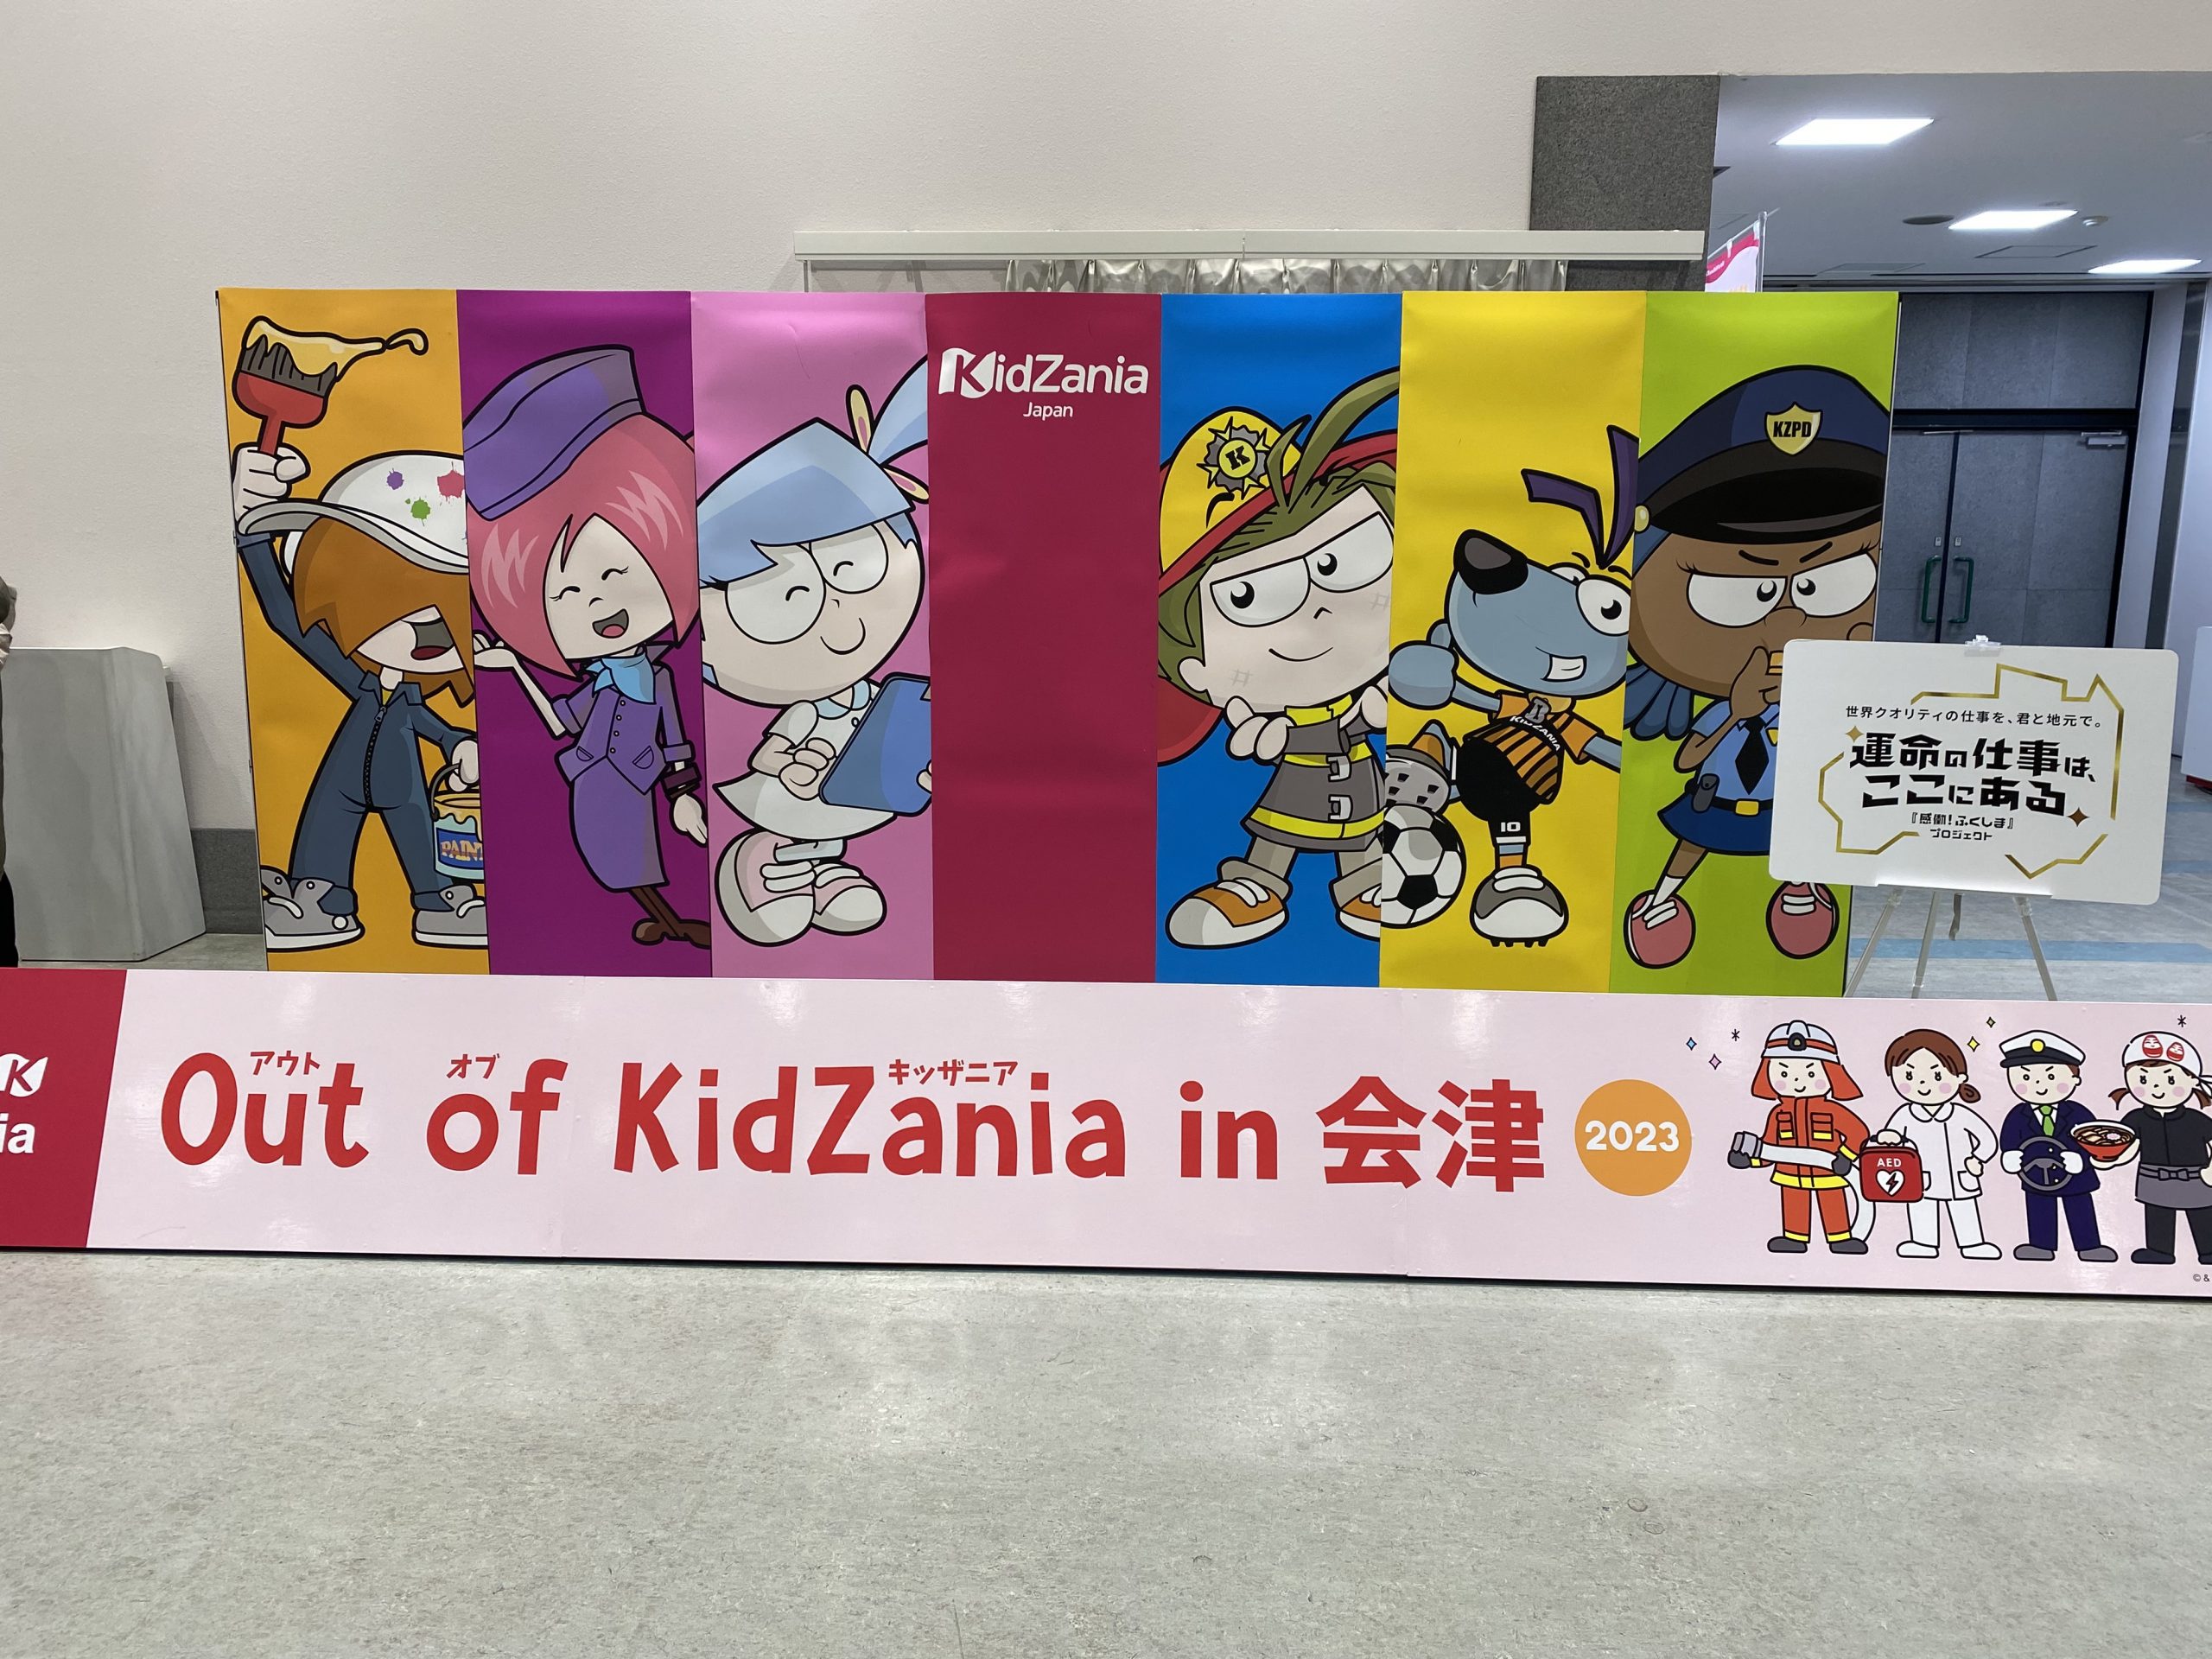 Out of KidZania in 会津　開催中